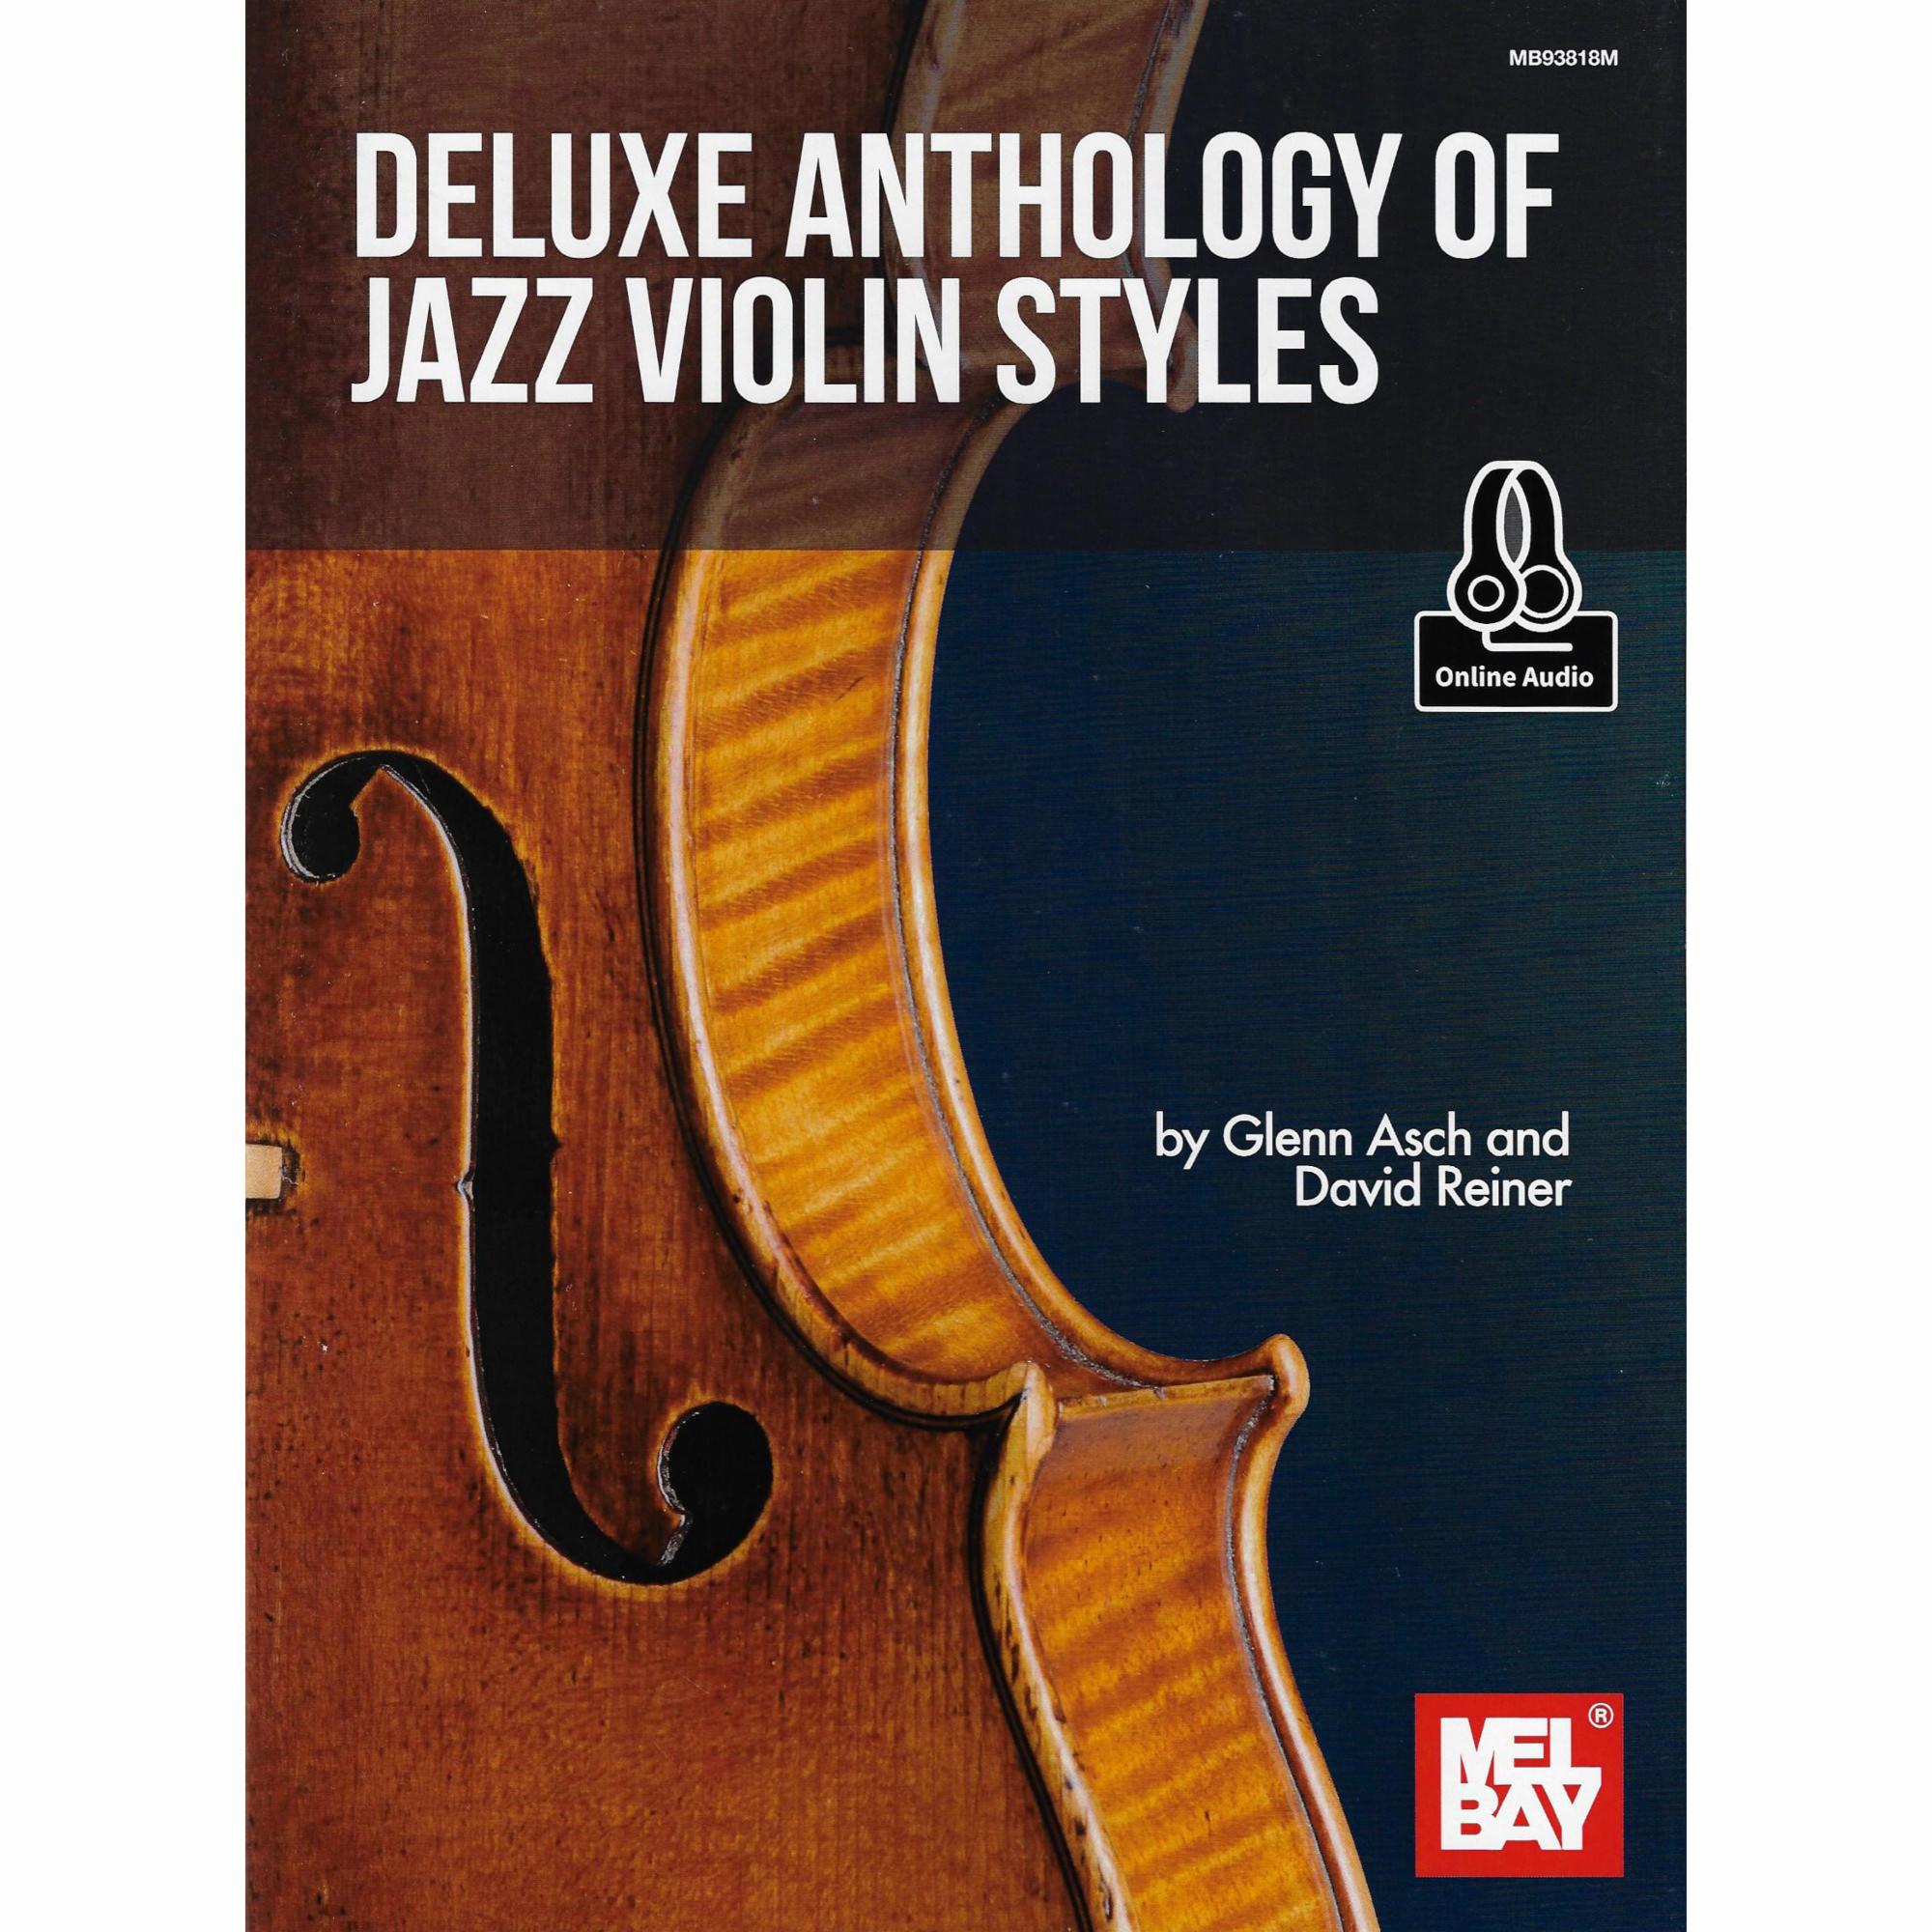 Deluxe Anthology of Jazz Violin Styles